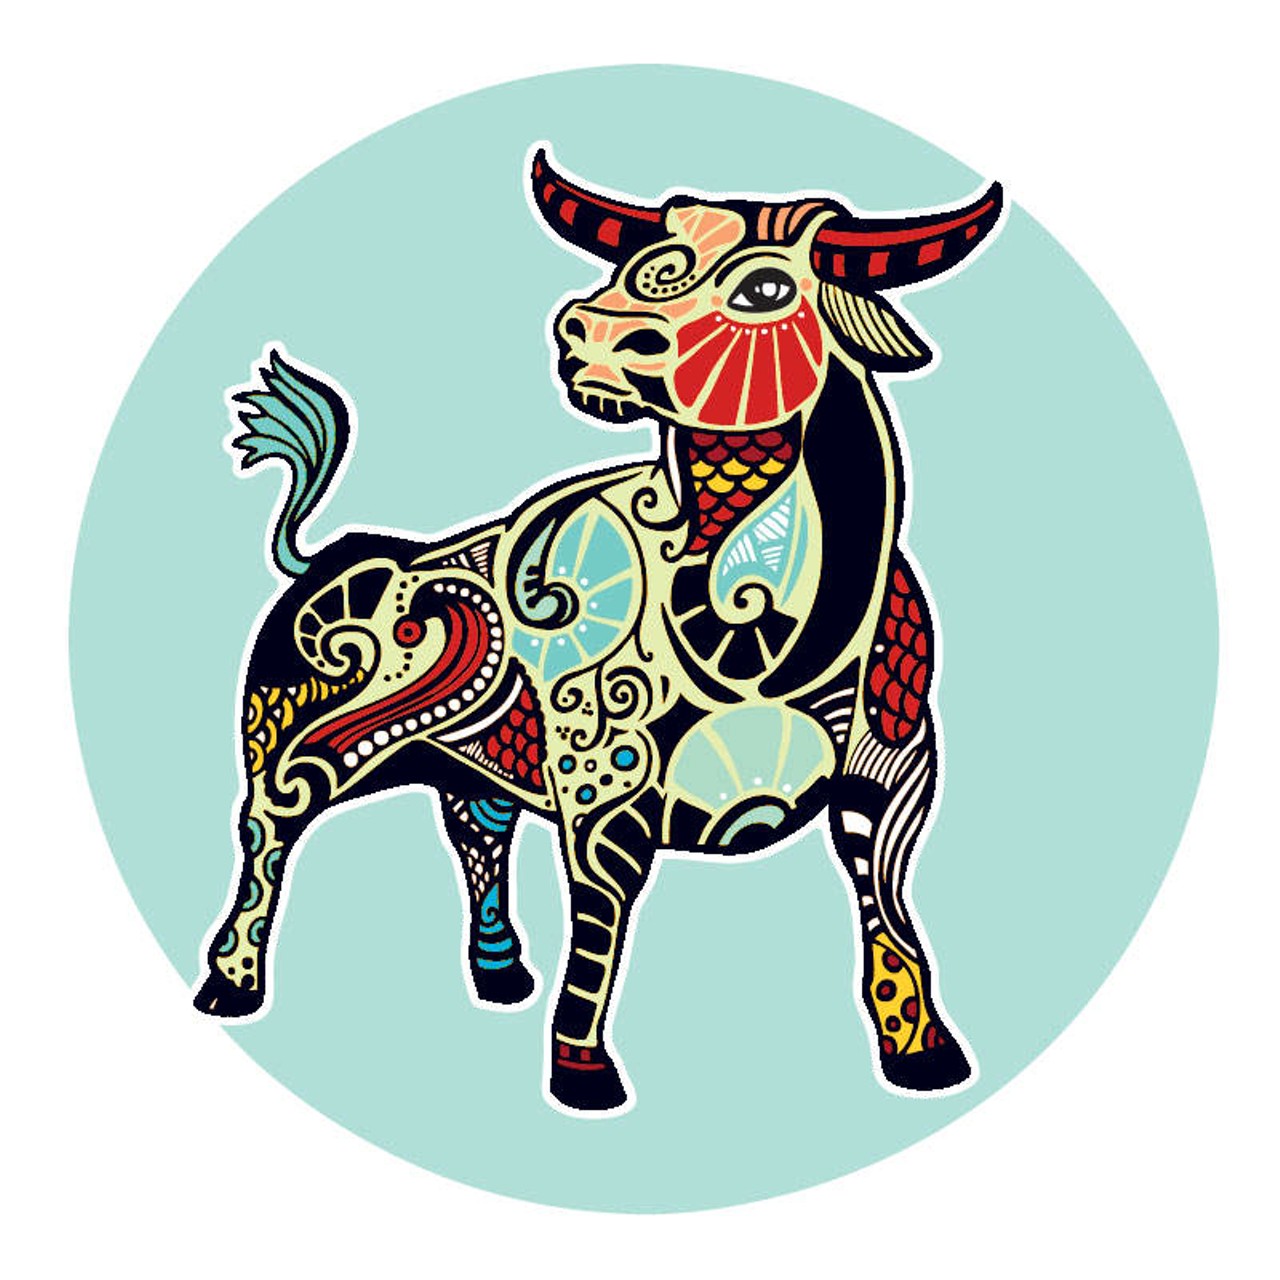 TAURUS (April 21 -May 20): 
Where you go from here is entirely up to you. If the next thing on your list isn&#146;t what those close to you have in mind you&#146;re going to have to look at ways to work it out. Don&#146;t get too parochial about how you decide to arrange things. The greater part of what you long for doesn&#146;t have to be restricted by compromise, or any fear that your self expression could screw it up. It&#146;s oxymoronic to think that you being totally yourself could deny the greater part of whatever your purpose in this situation happens to be. Only you can give yourself permission to connect with it.